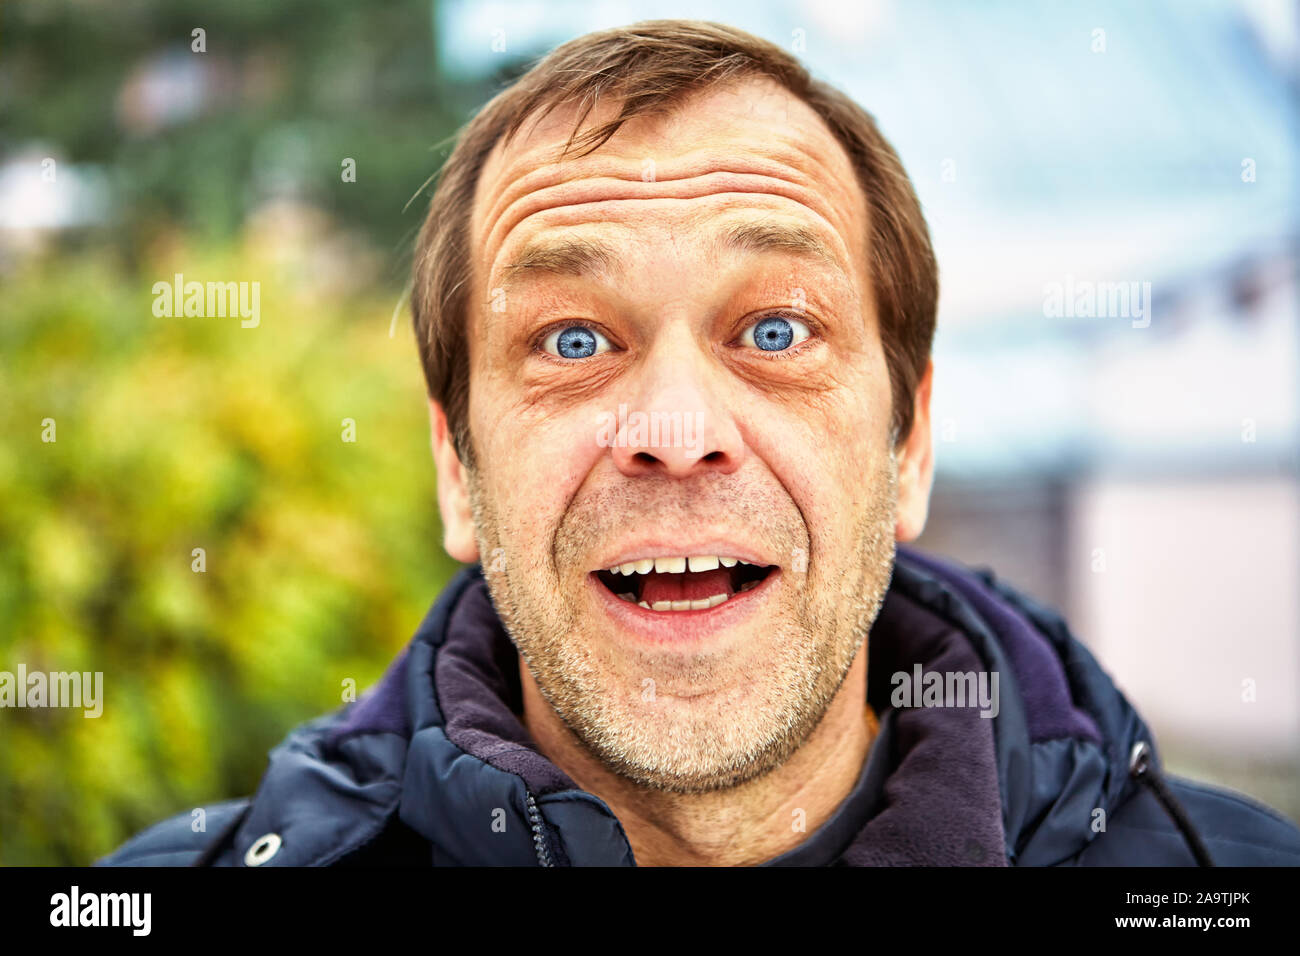 The surprised face of a man of fifty years old against the background of a European street, close-up. Head of a joyful middle-aged male over 50 outdoo Stock Photo